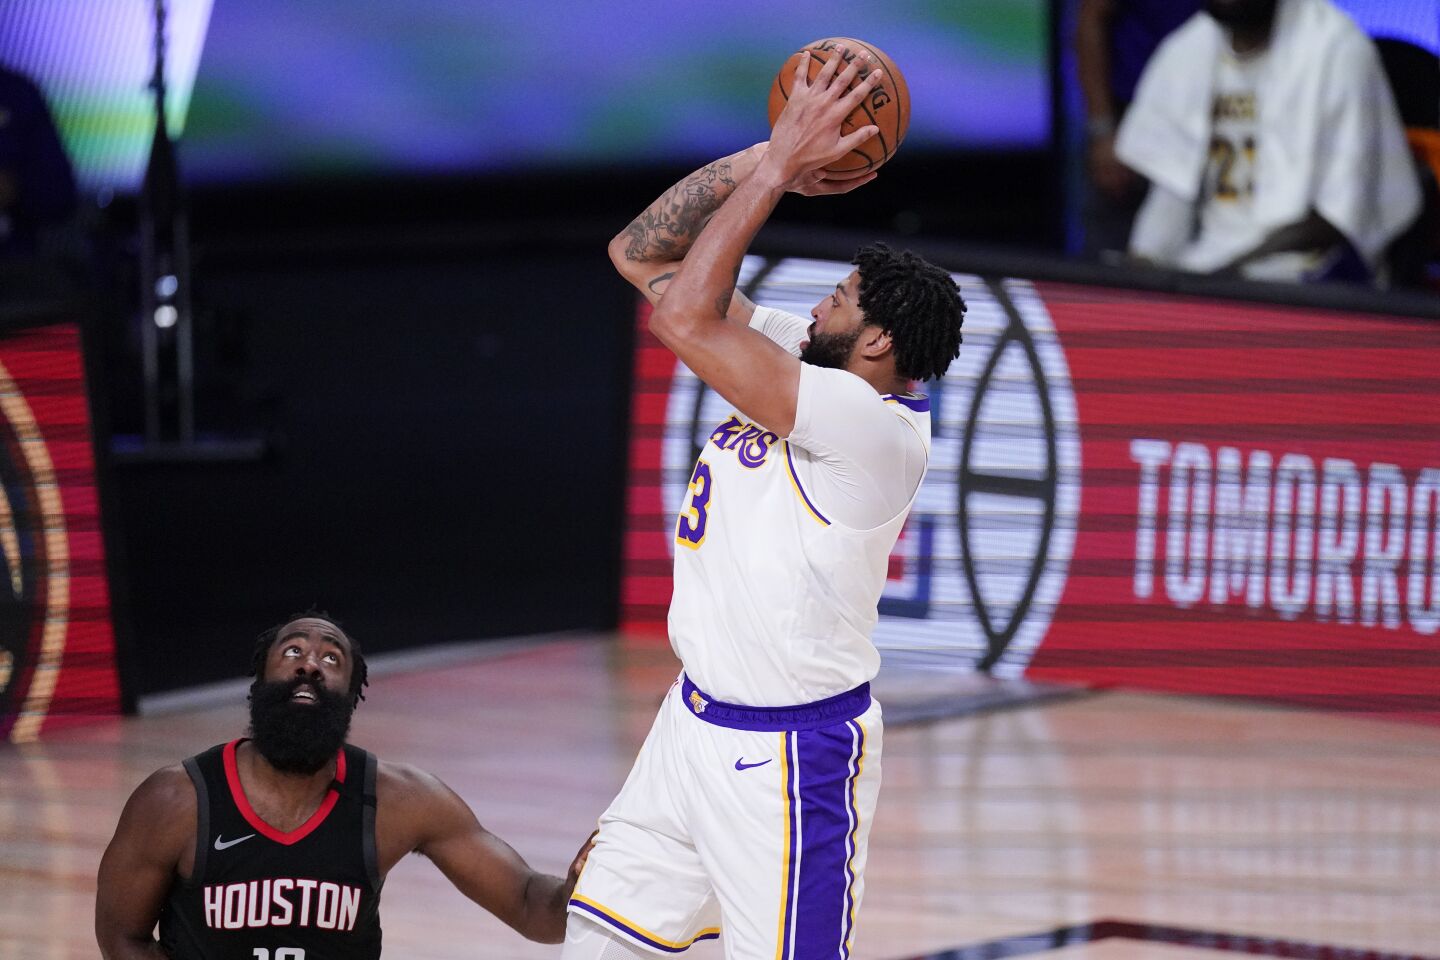 Lakers forward Anthony Davis elevates for a shot in the lane during Game 5.